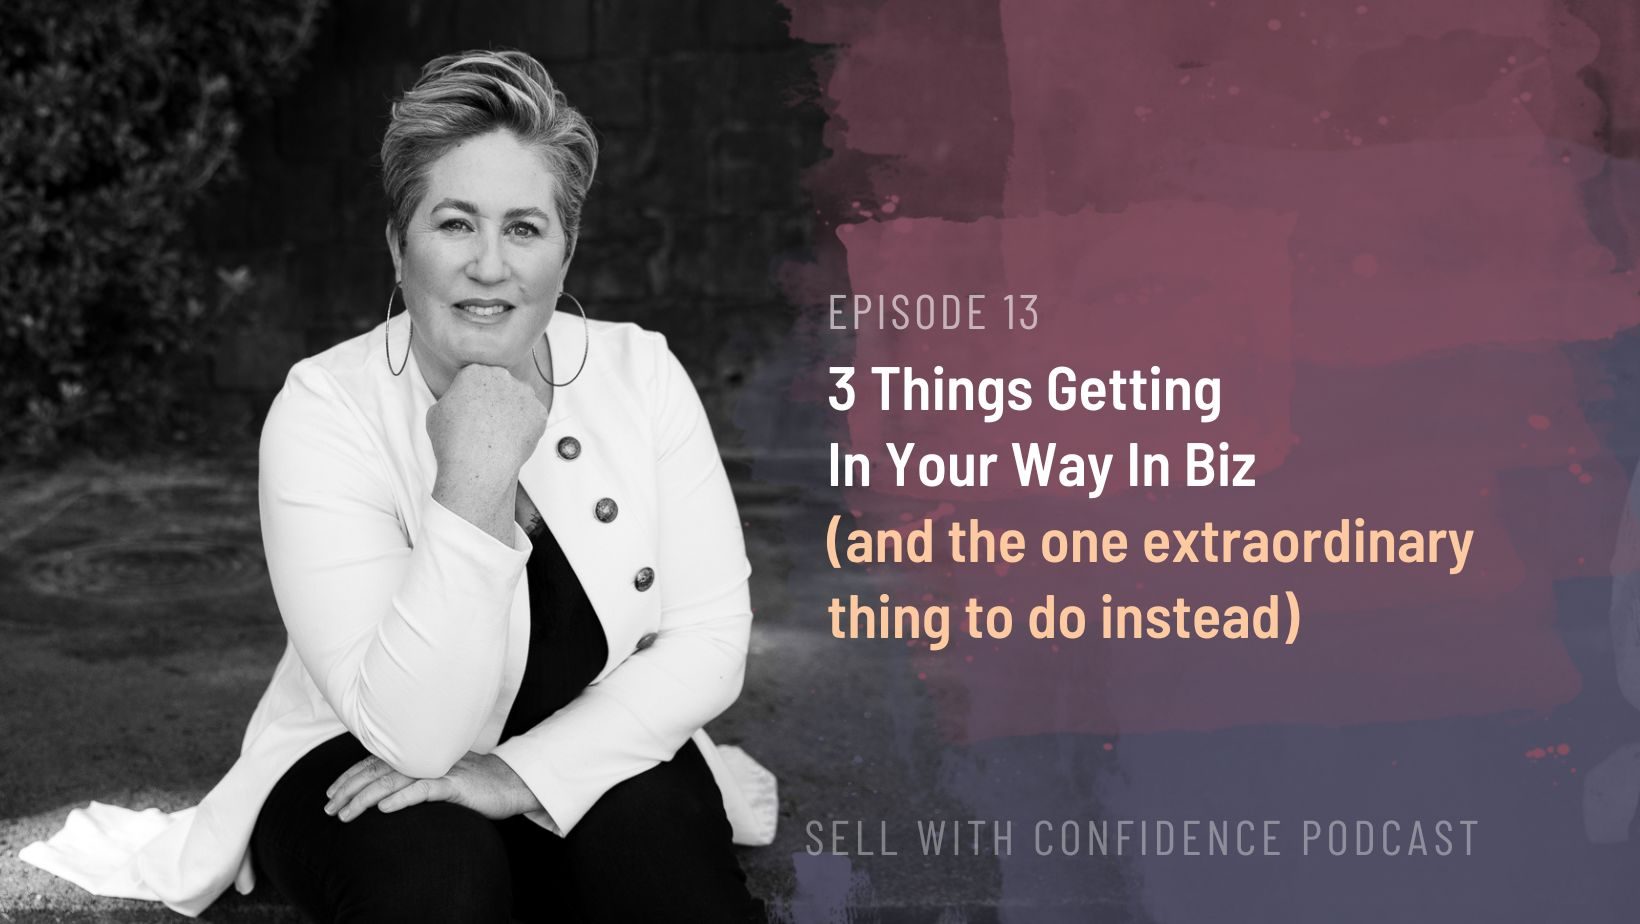 3 Things getting in your way in biz - Natalie Tolhopf Podcast